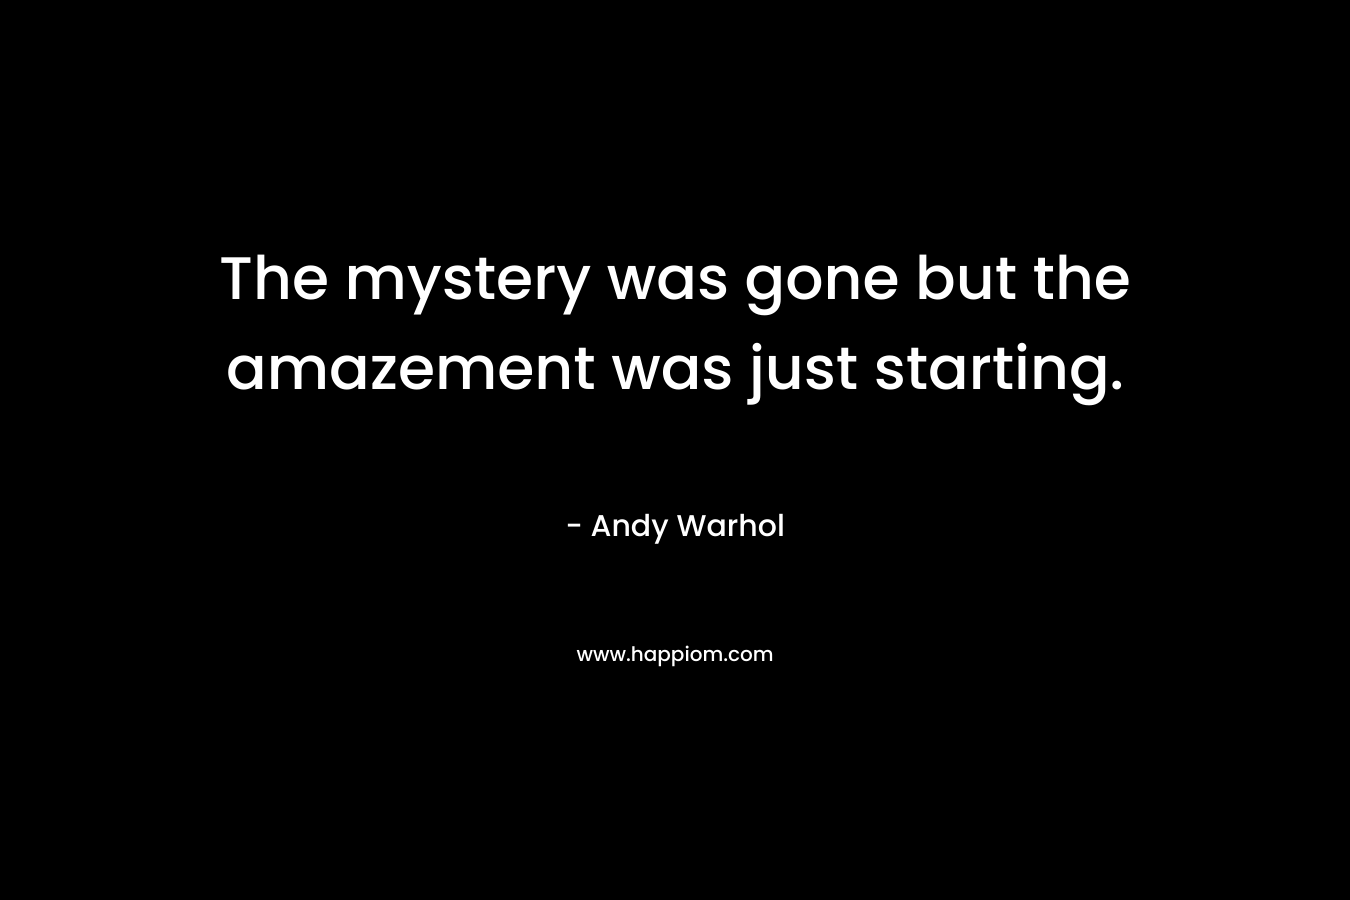 The mystery was gone but the amazement was just starting. – Andy Warhol